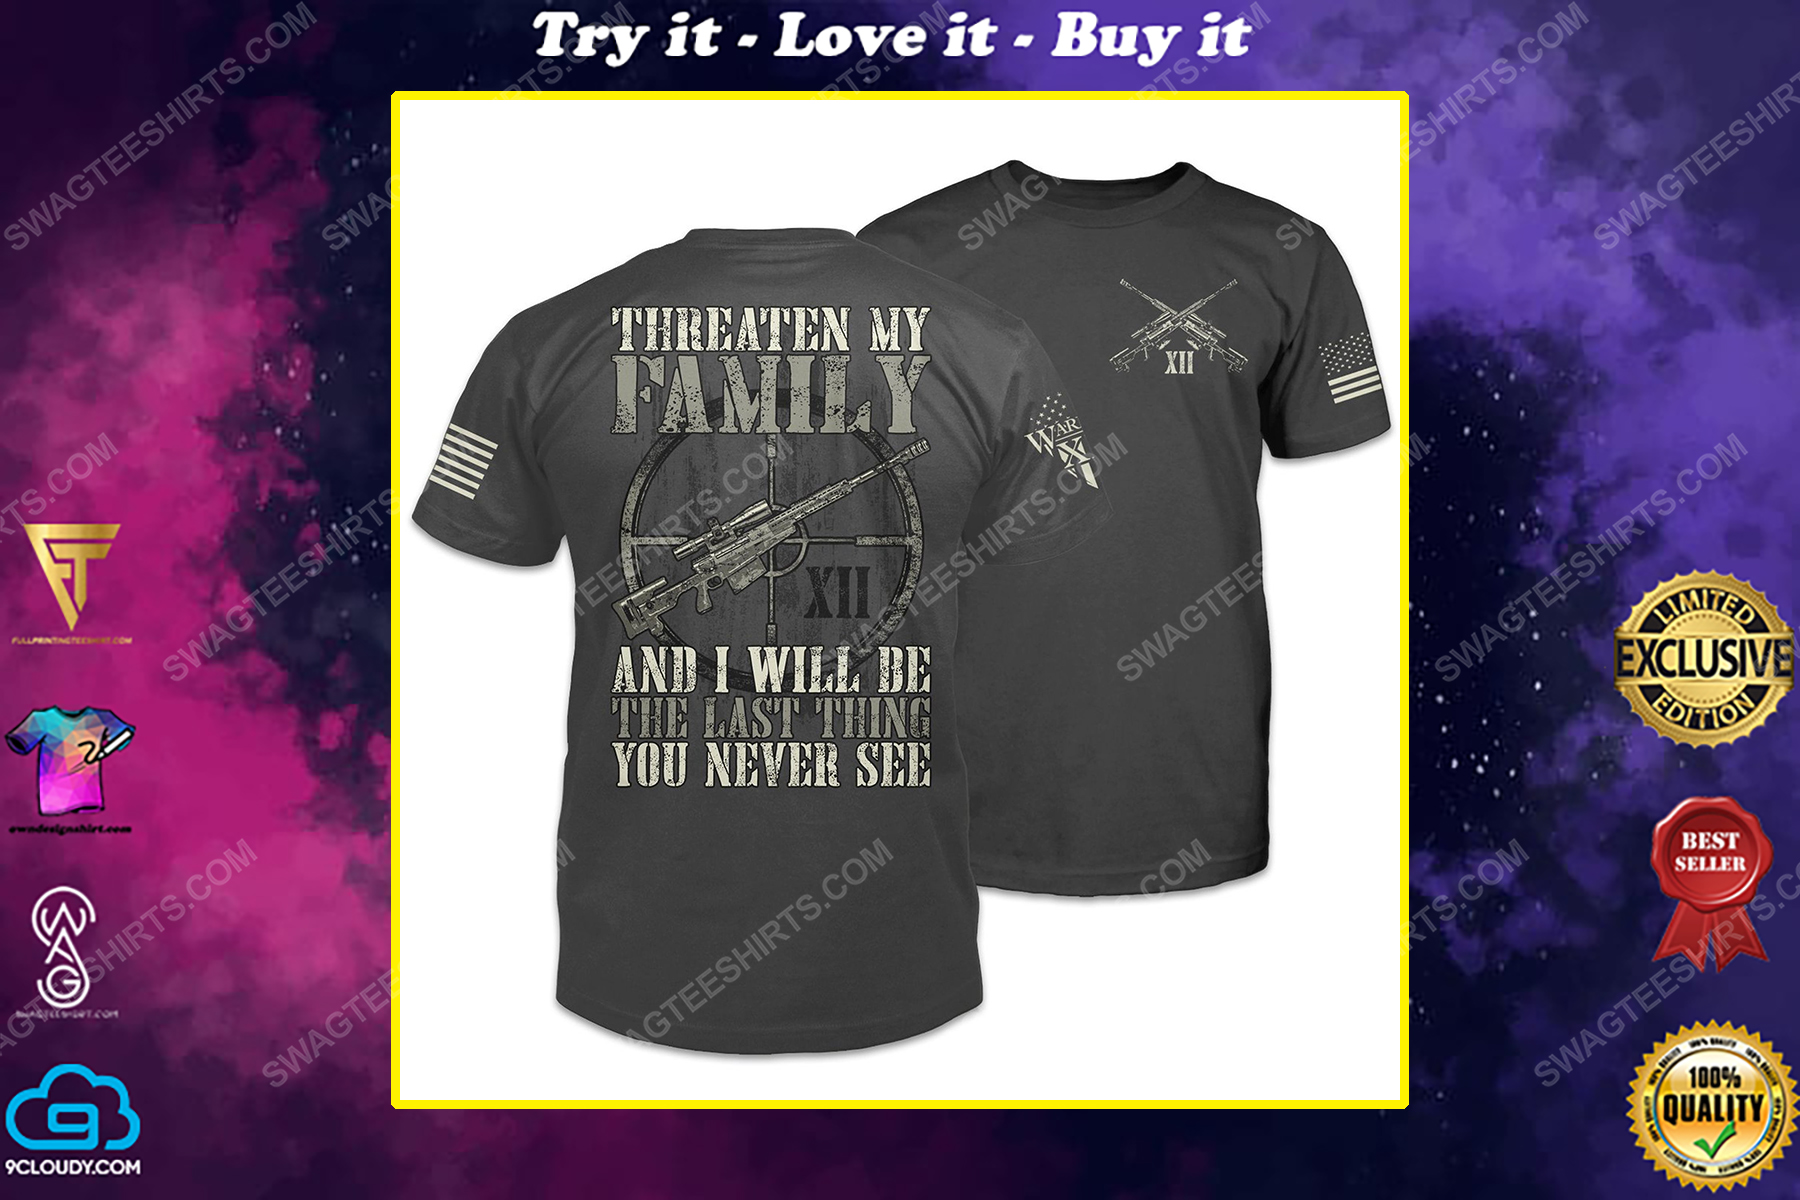 Threaten my family and i'll be the last thing you never see shirt